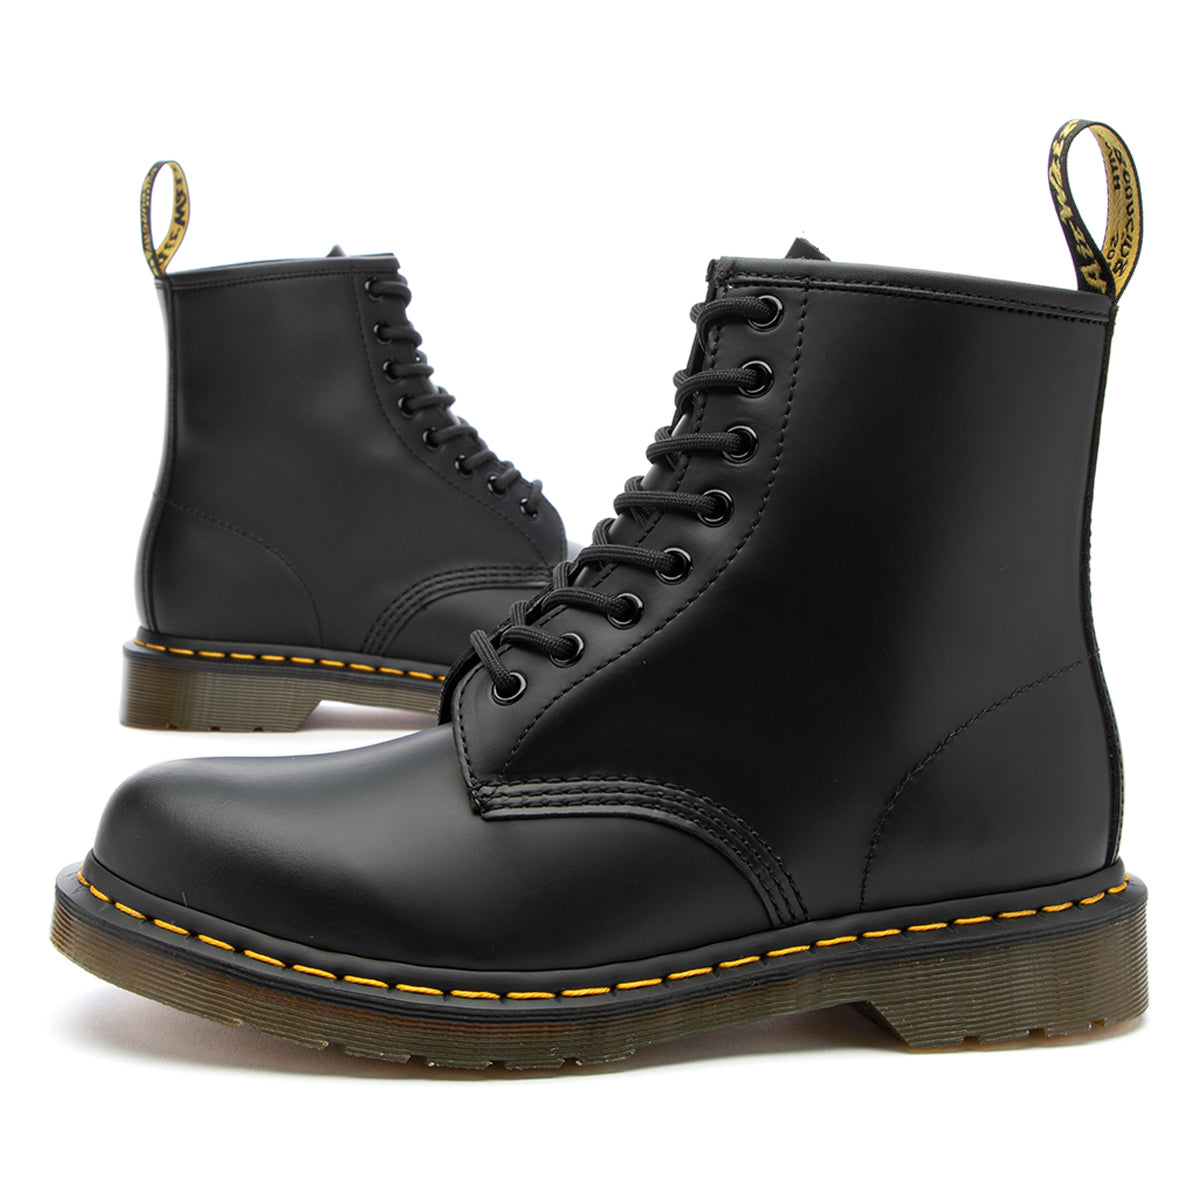 Dr. Martens Women's 8-Eye Smooth Combat Boot, Black, Size 10M